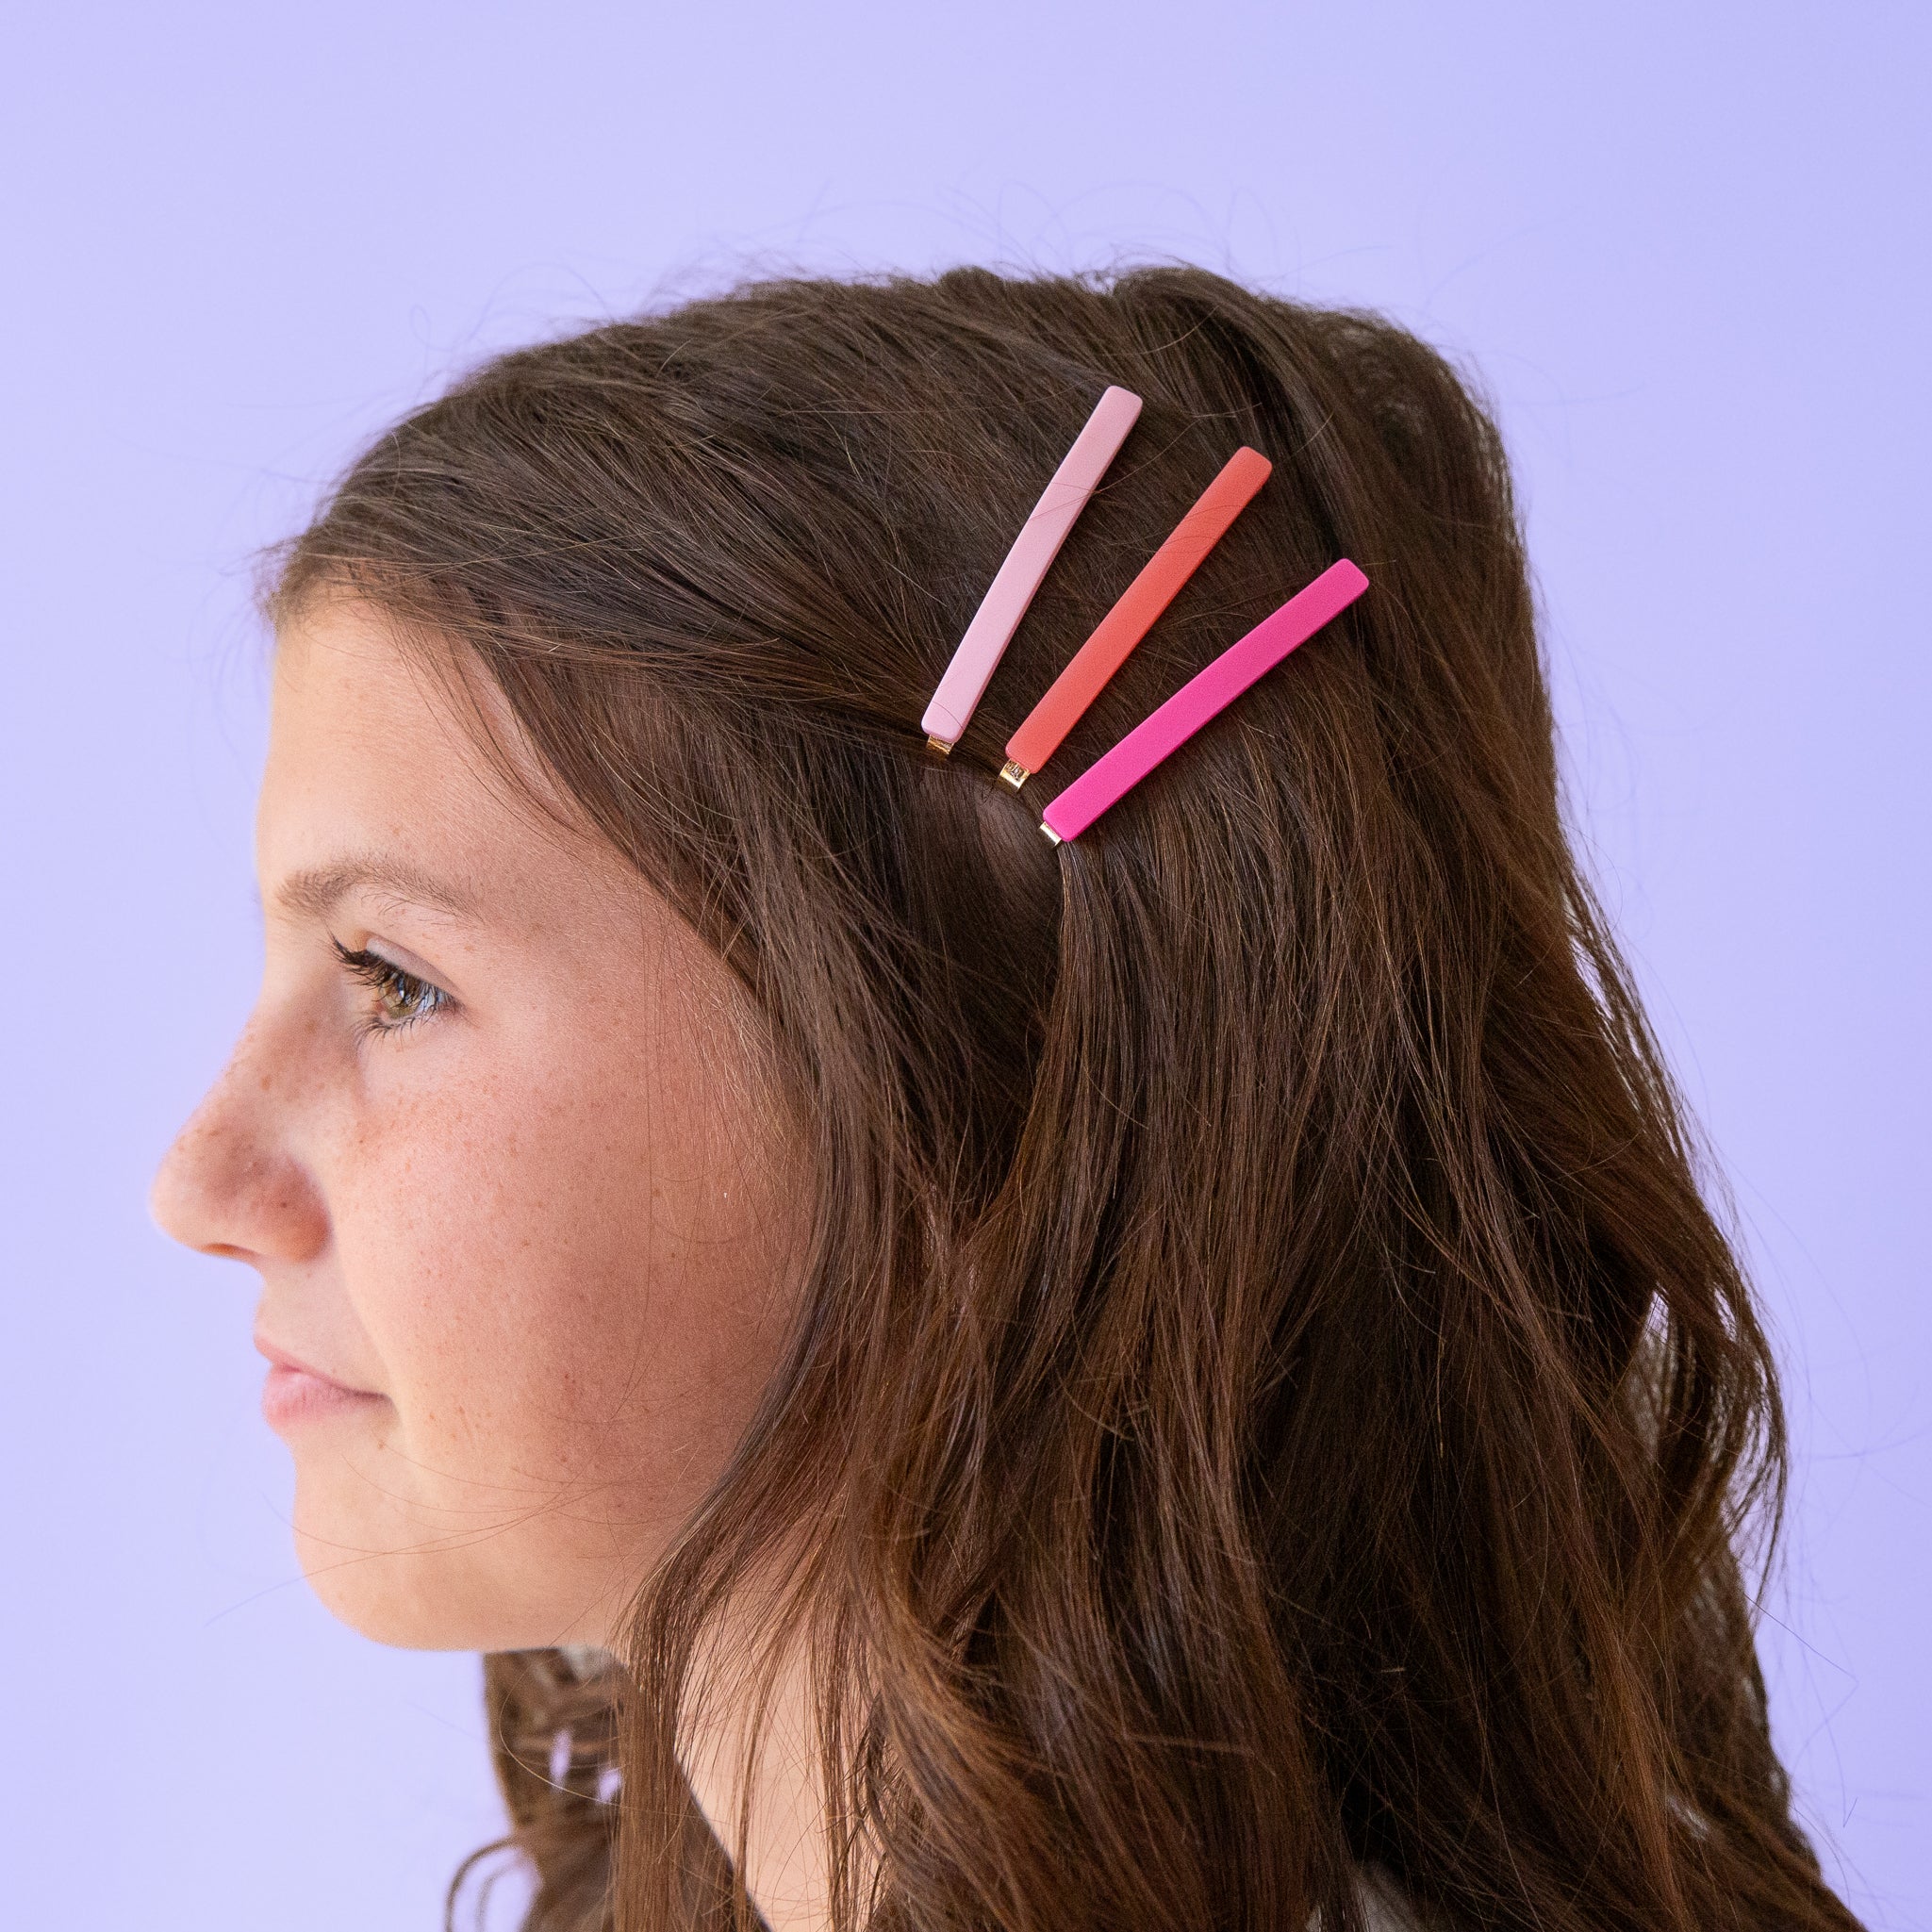 A set of 6 straight bobby pin clips in pink and orange.